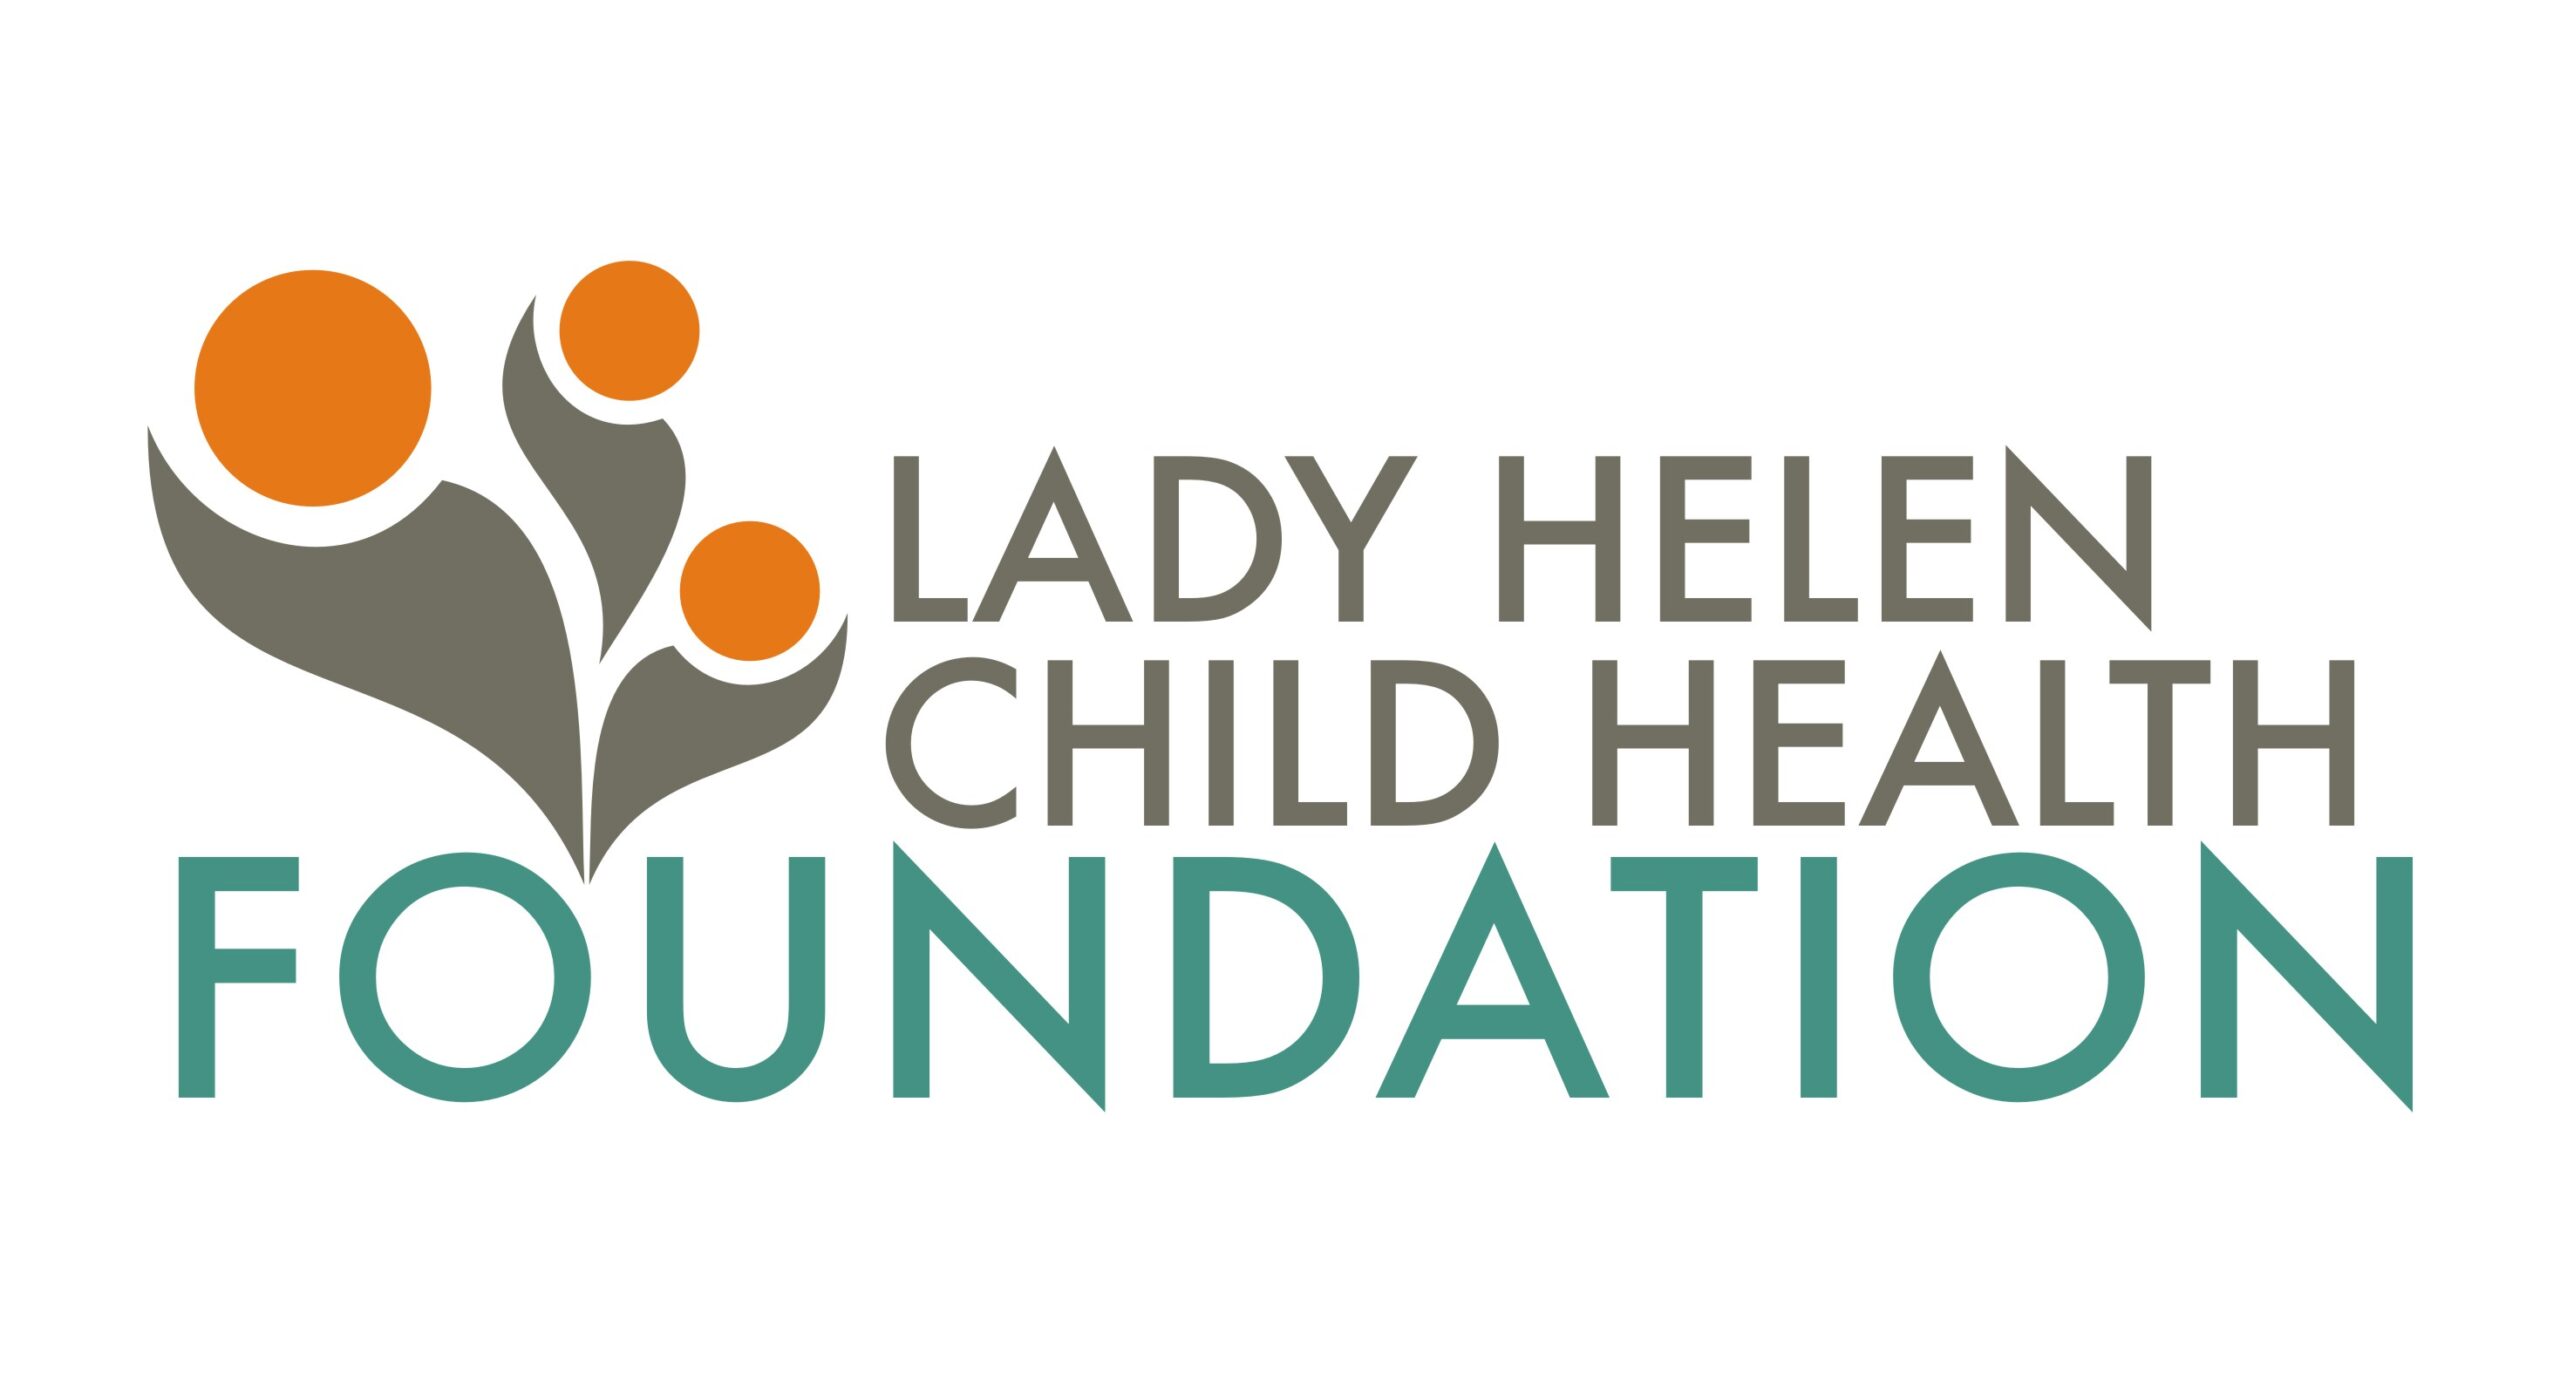 Recruitment: Apply For Lady Helen Child Health Foundation Recruitment 2021